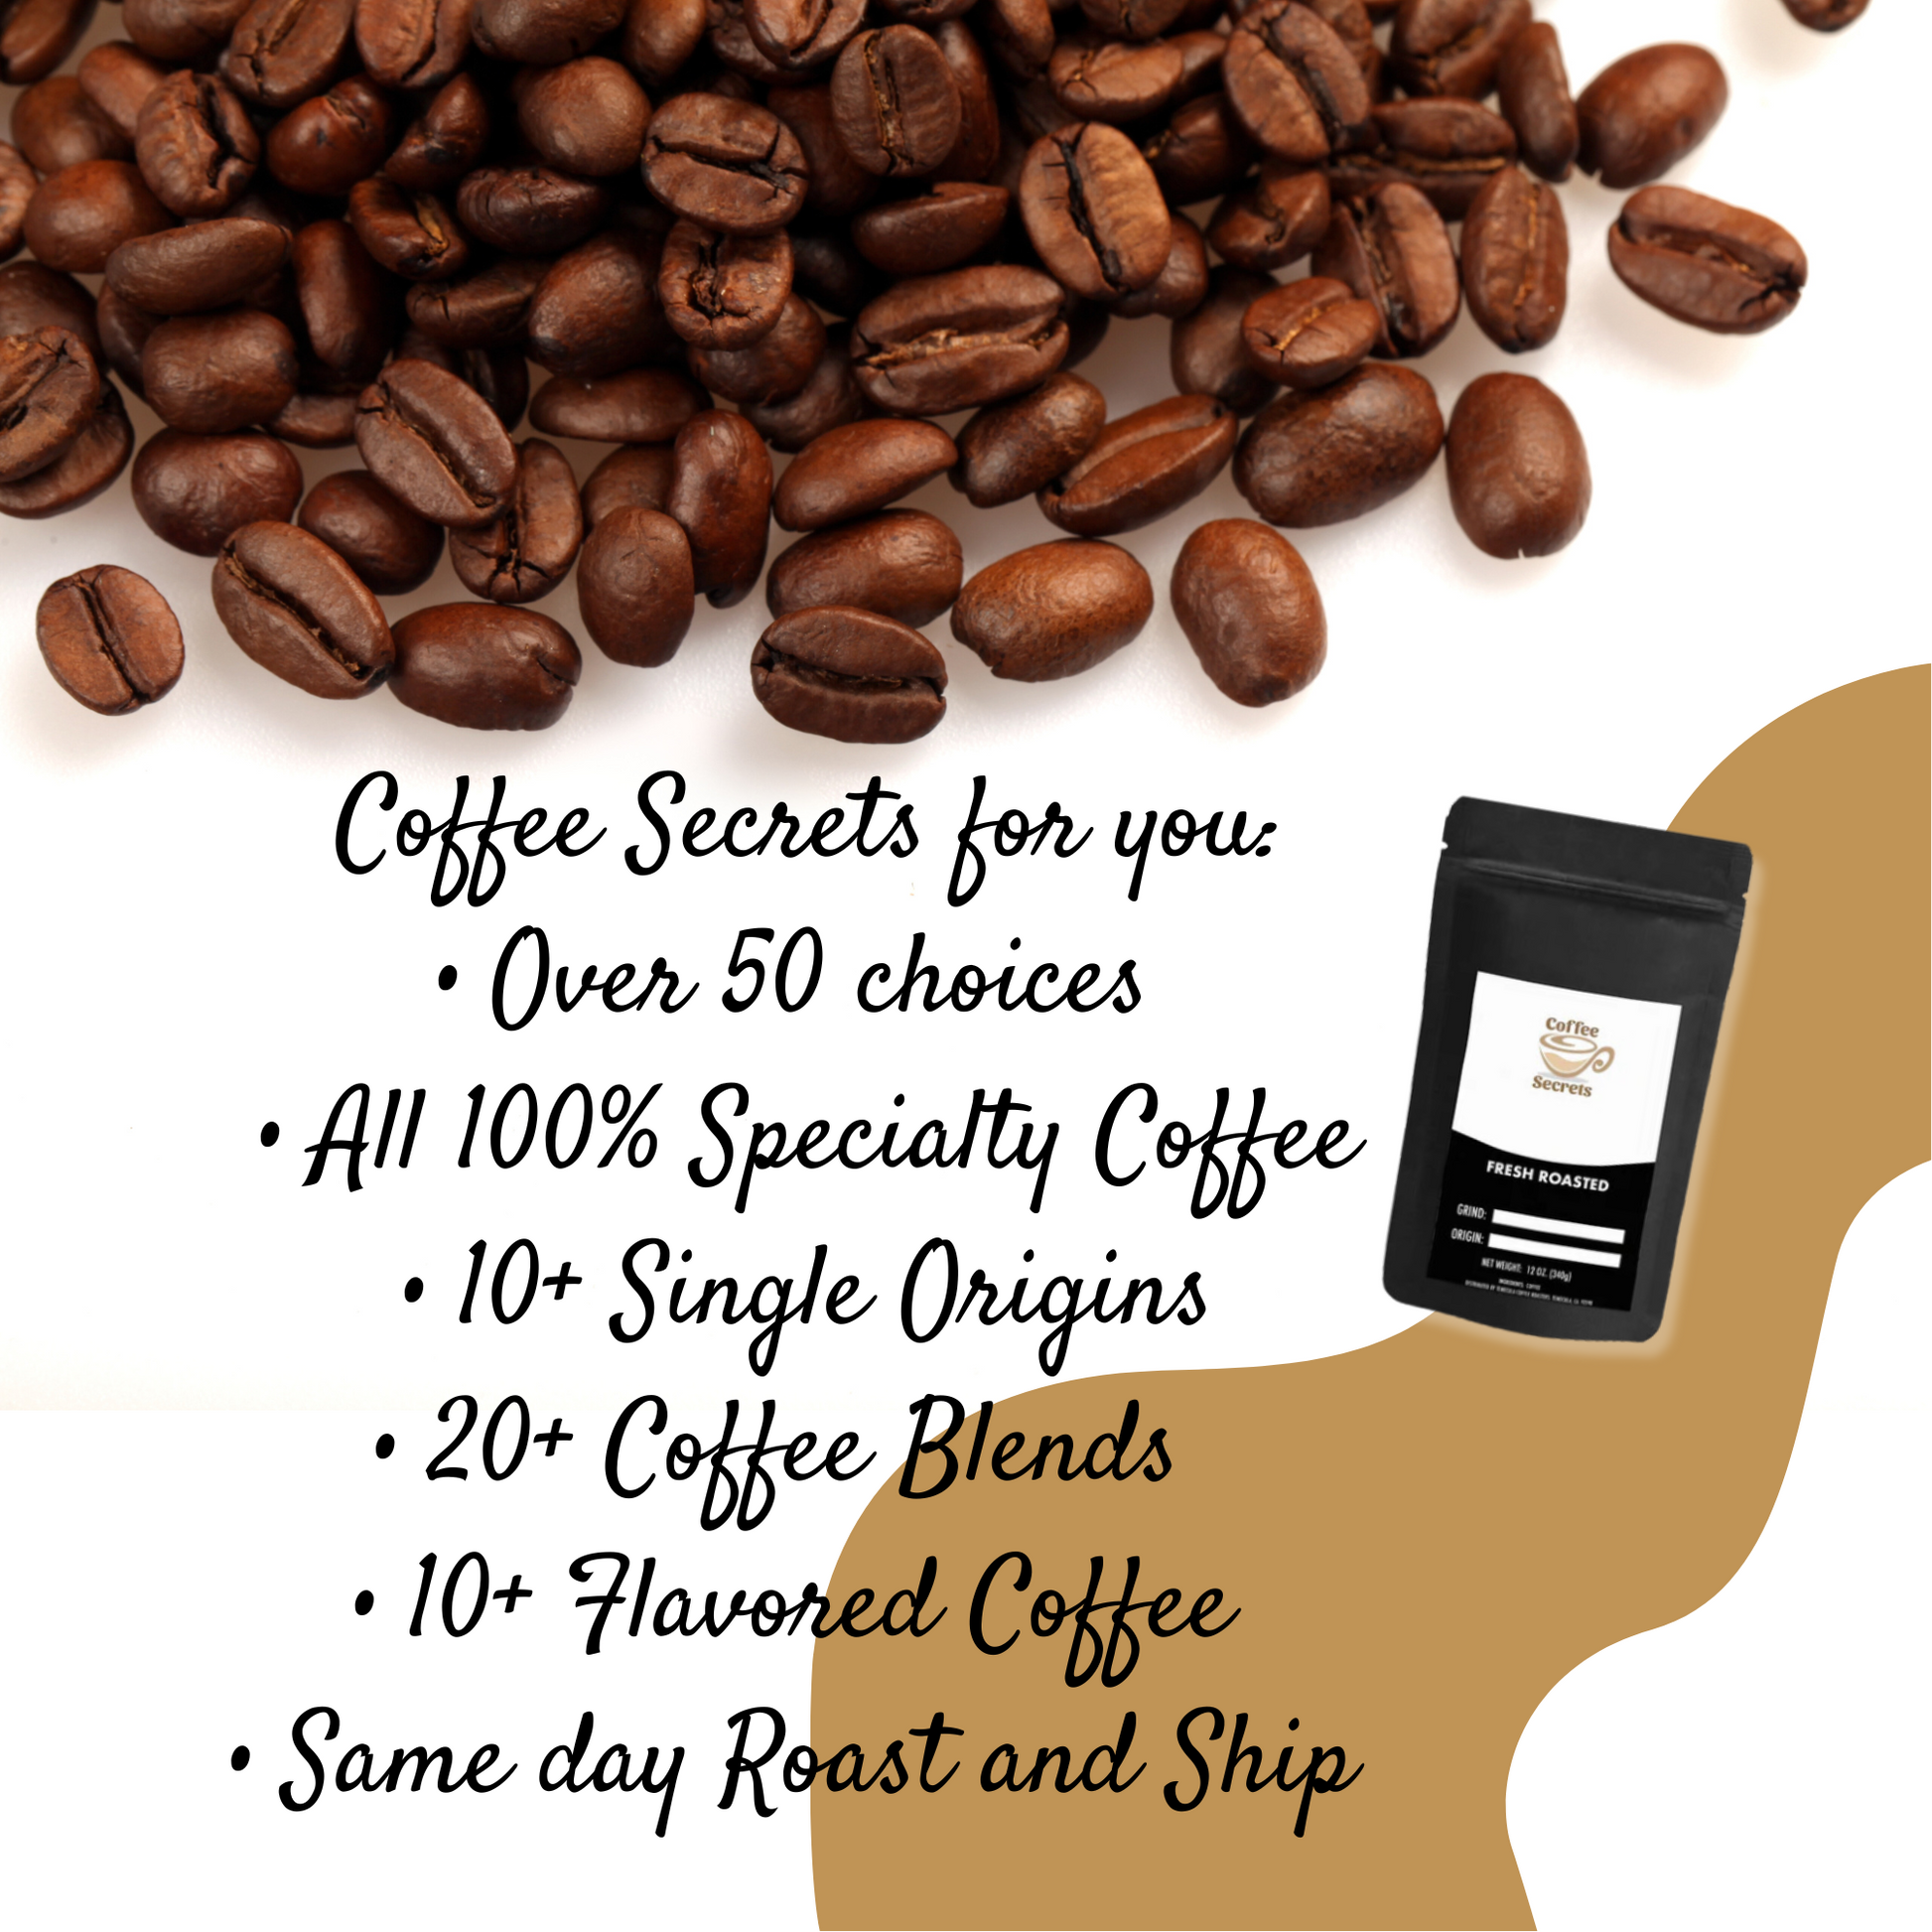 Close-up of coffee beans with a Coffee Secrets branded coffee bag. Text overlay reads: 'Coffee Secrets for you: Over 50 choices, All 100% Specialty Coffee, 10+ Single Origins, 20+ Coffee Blends, 10+ Flavored Coffee, Same day Roast and Ship.